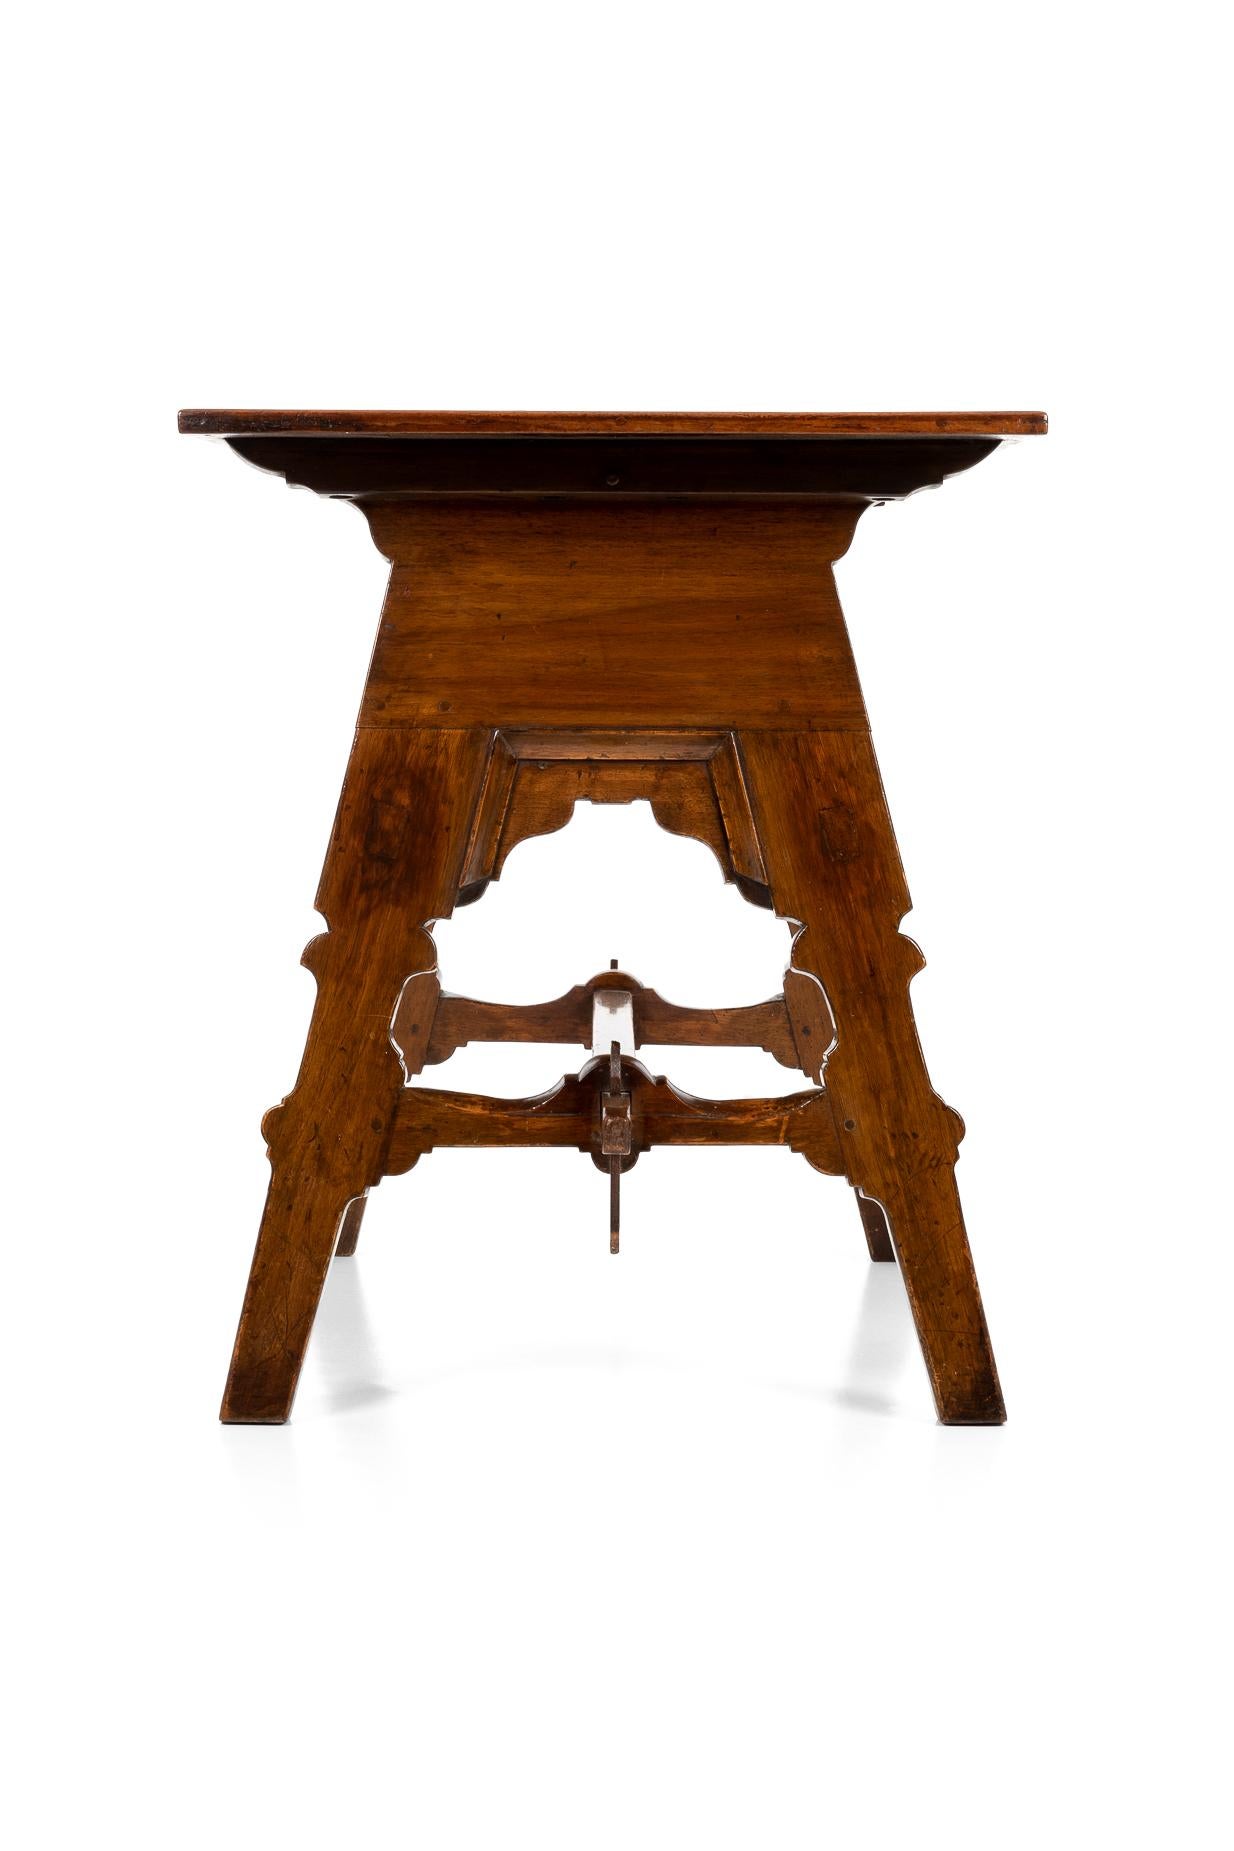 An unusual Spanish olive wood table with a rectangular top with intricately inlaid panels. The panels depict rampant lions in each corner with harlequin and classical motifs to the sides. Splayed trestle base and central shaped stretcher, with